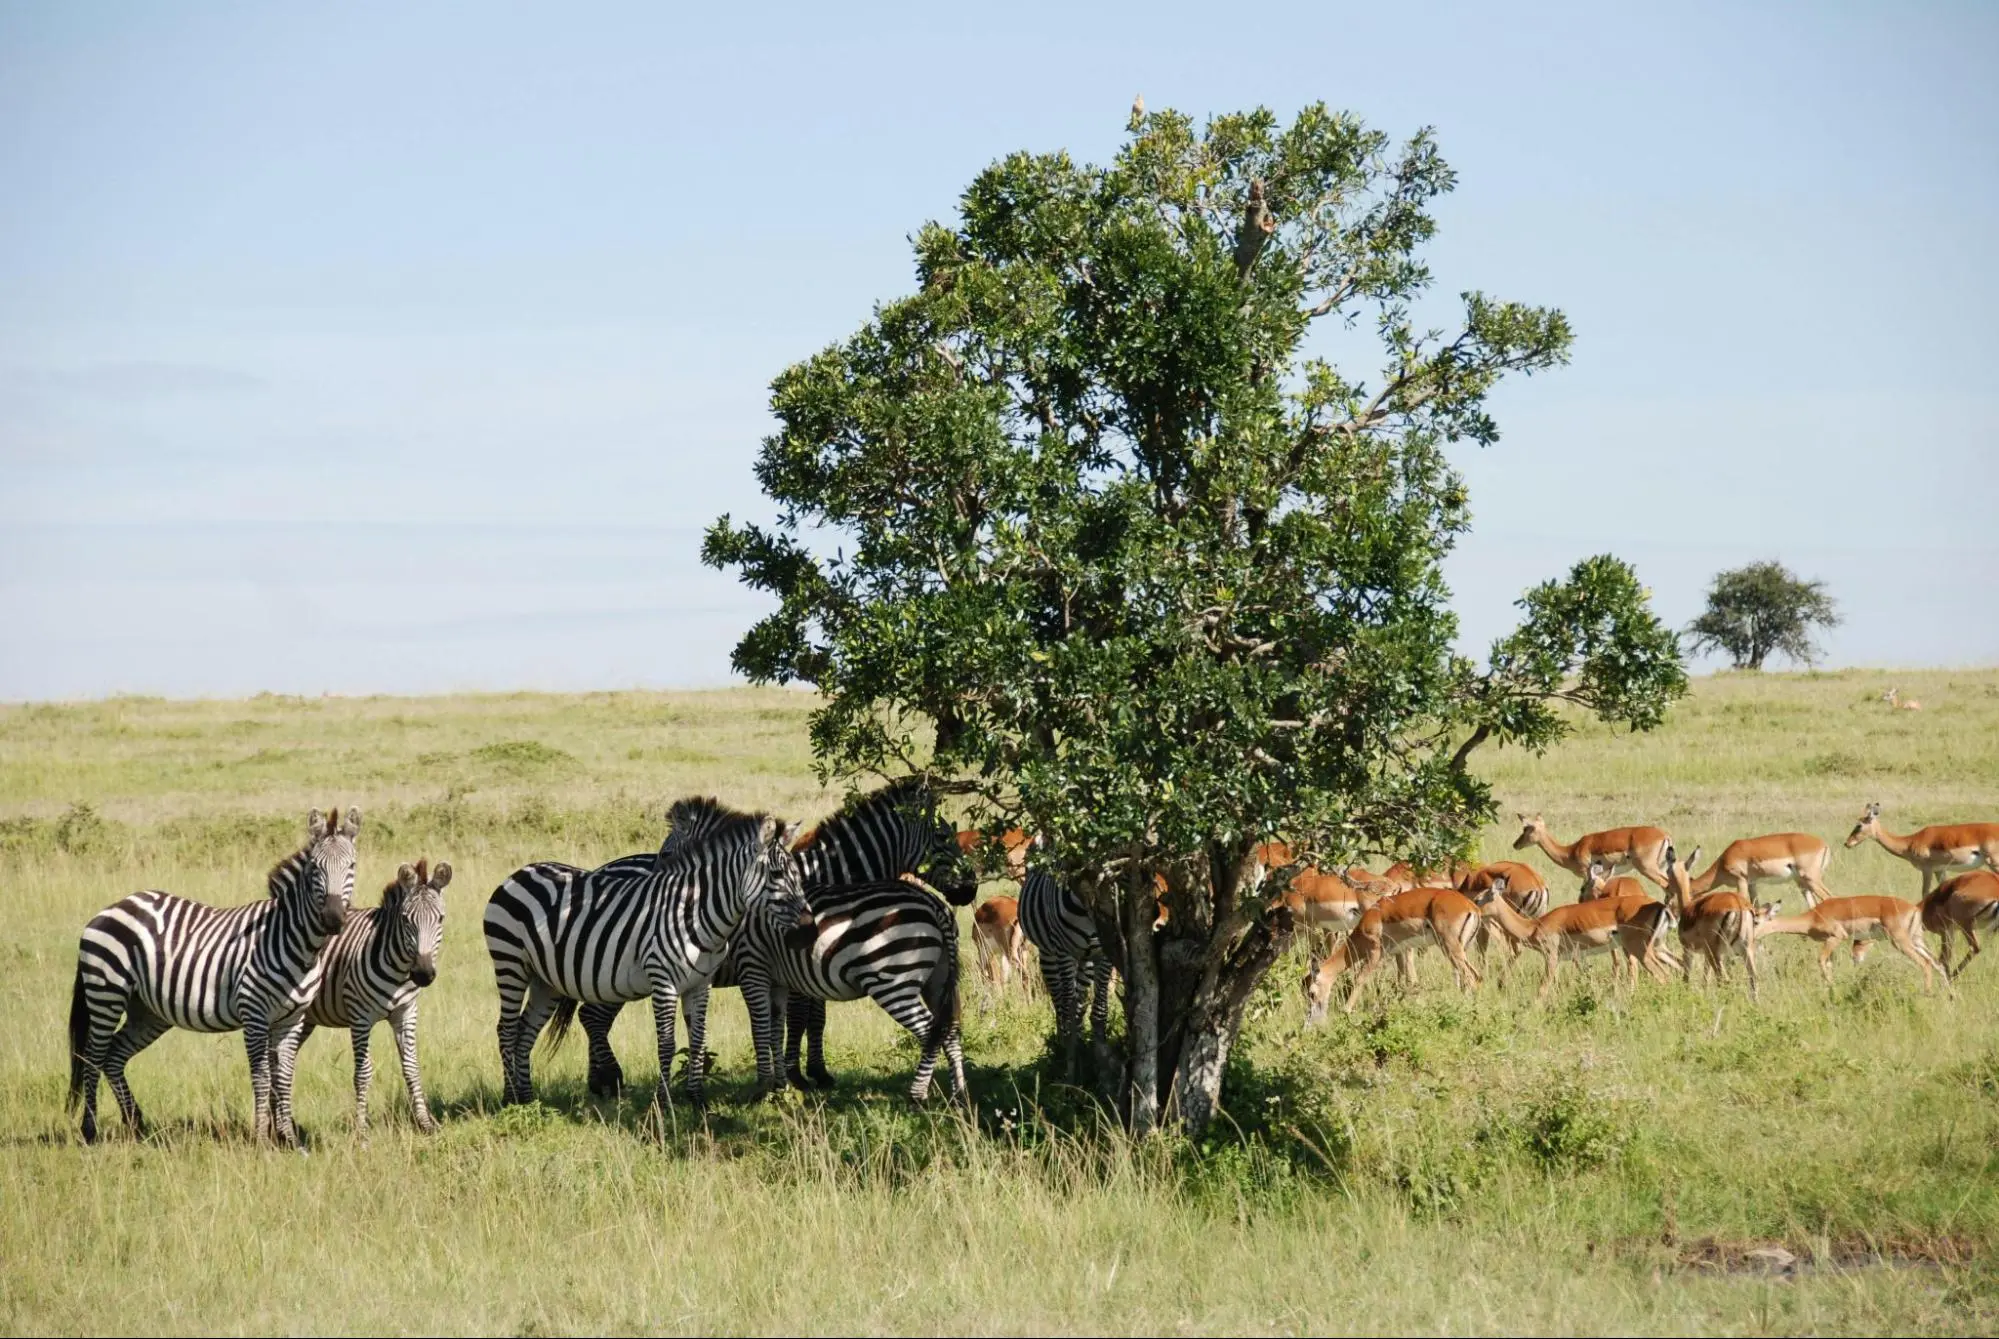 Zebras and antelope standing around a tree.